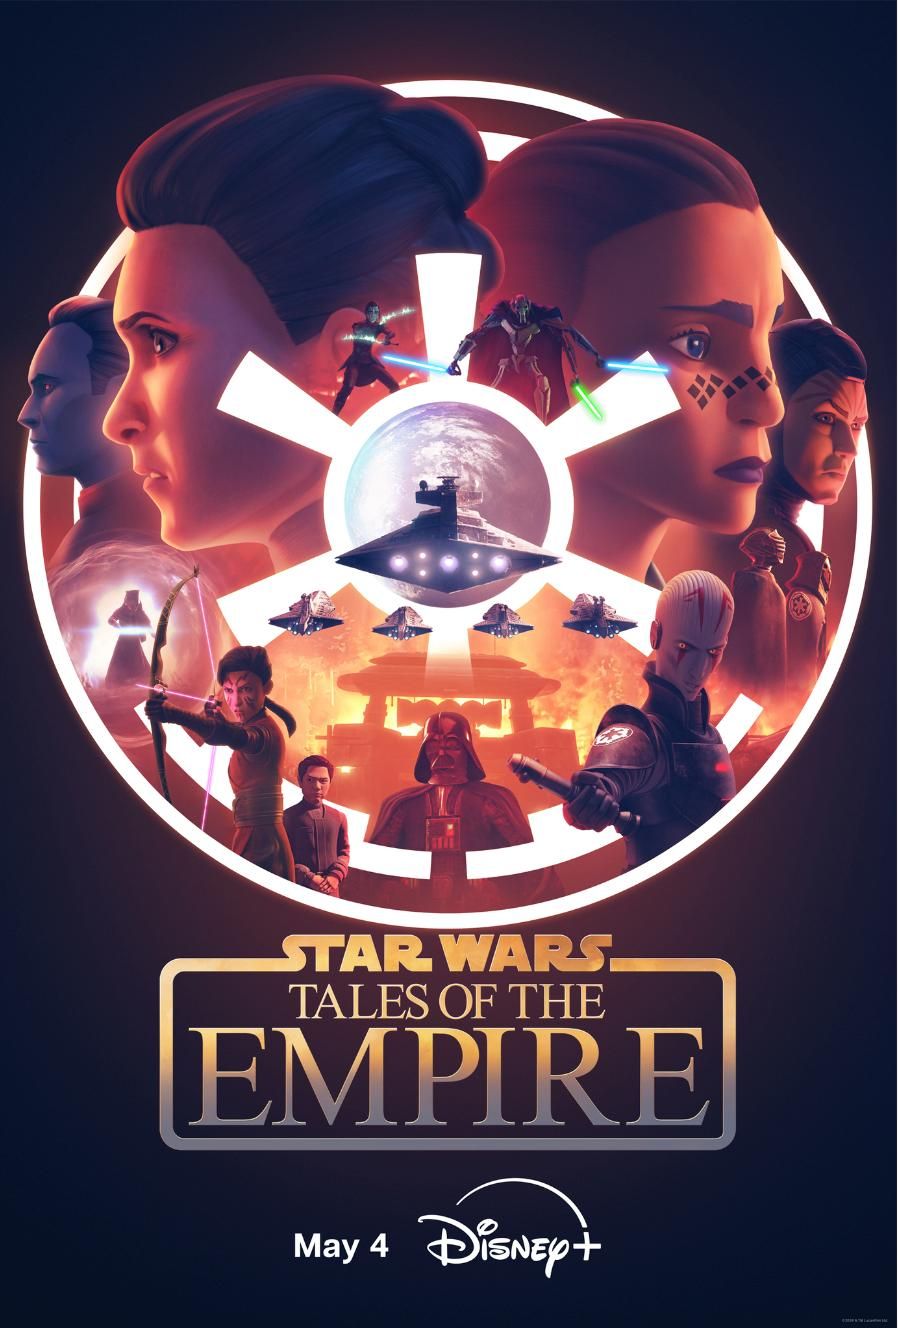 Star Wars Tales of the Empire TV Show Poster